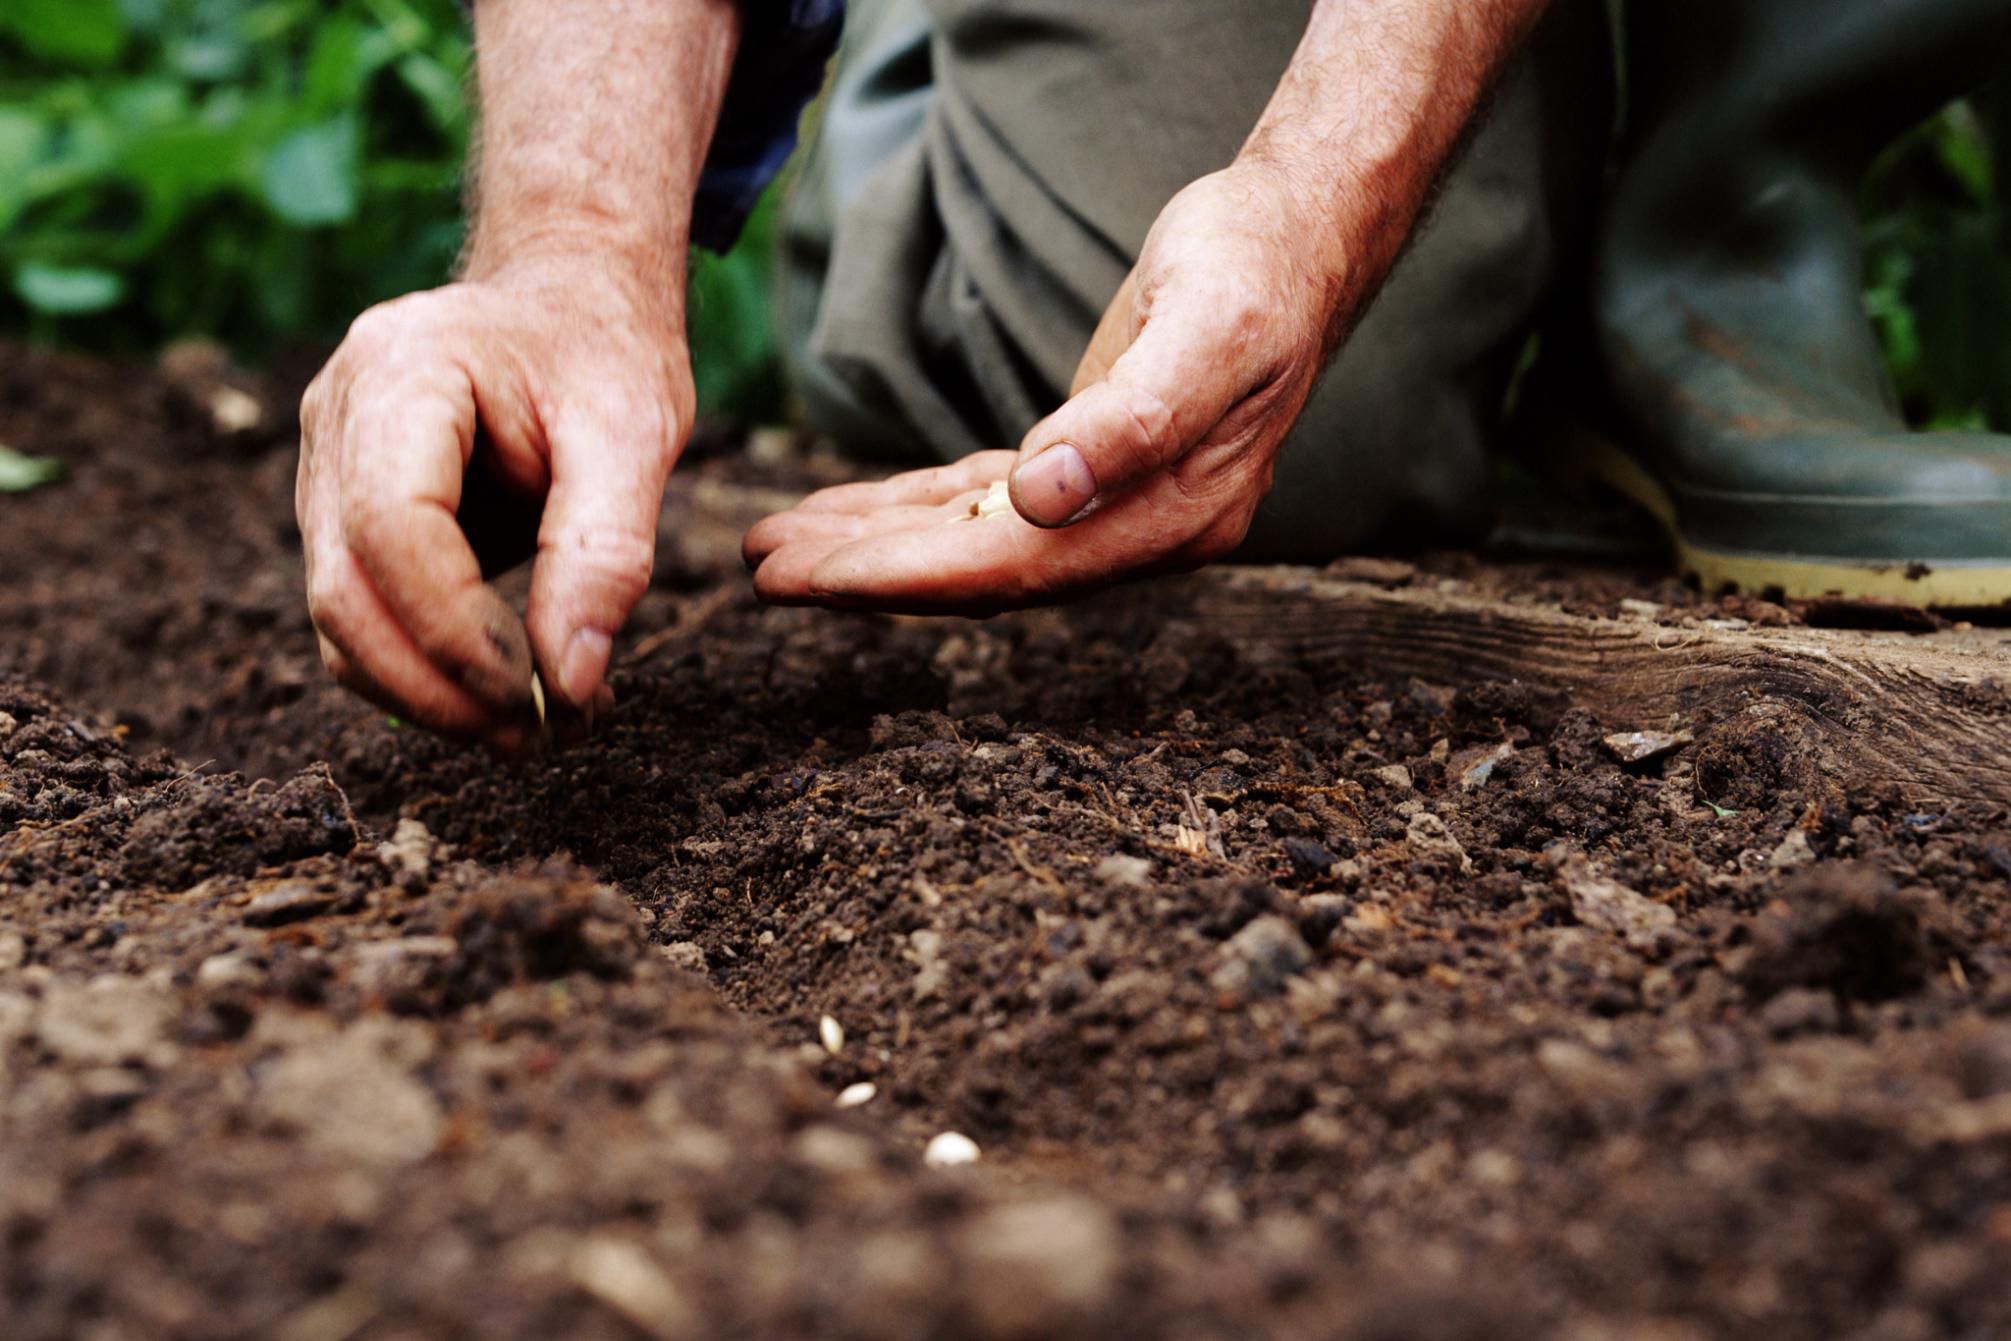 How To Clean Soil Before Planting